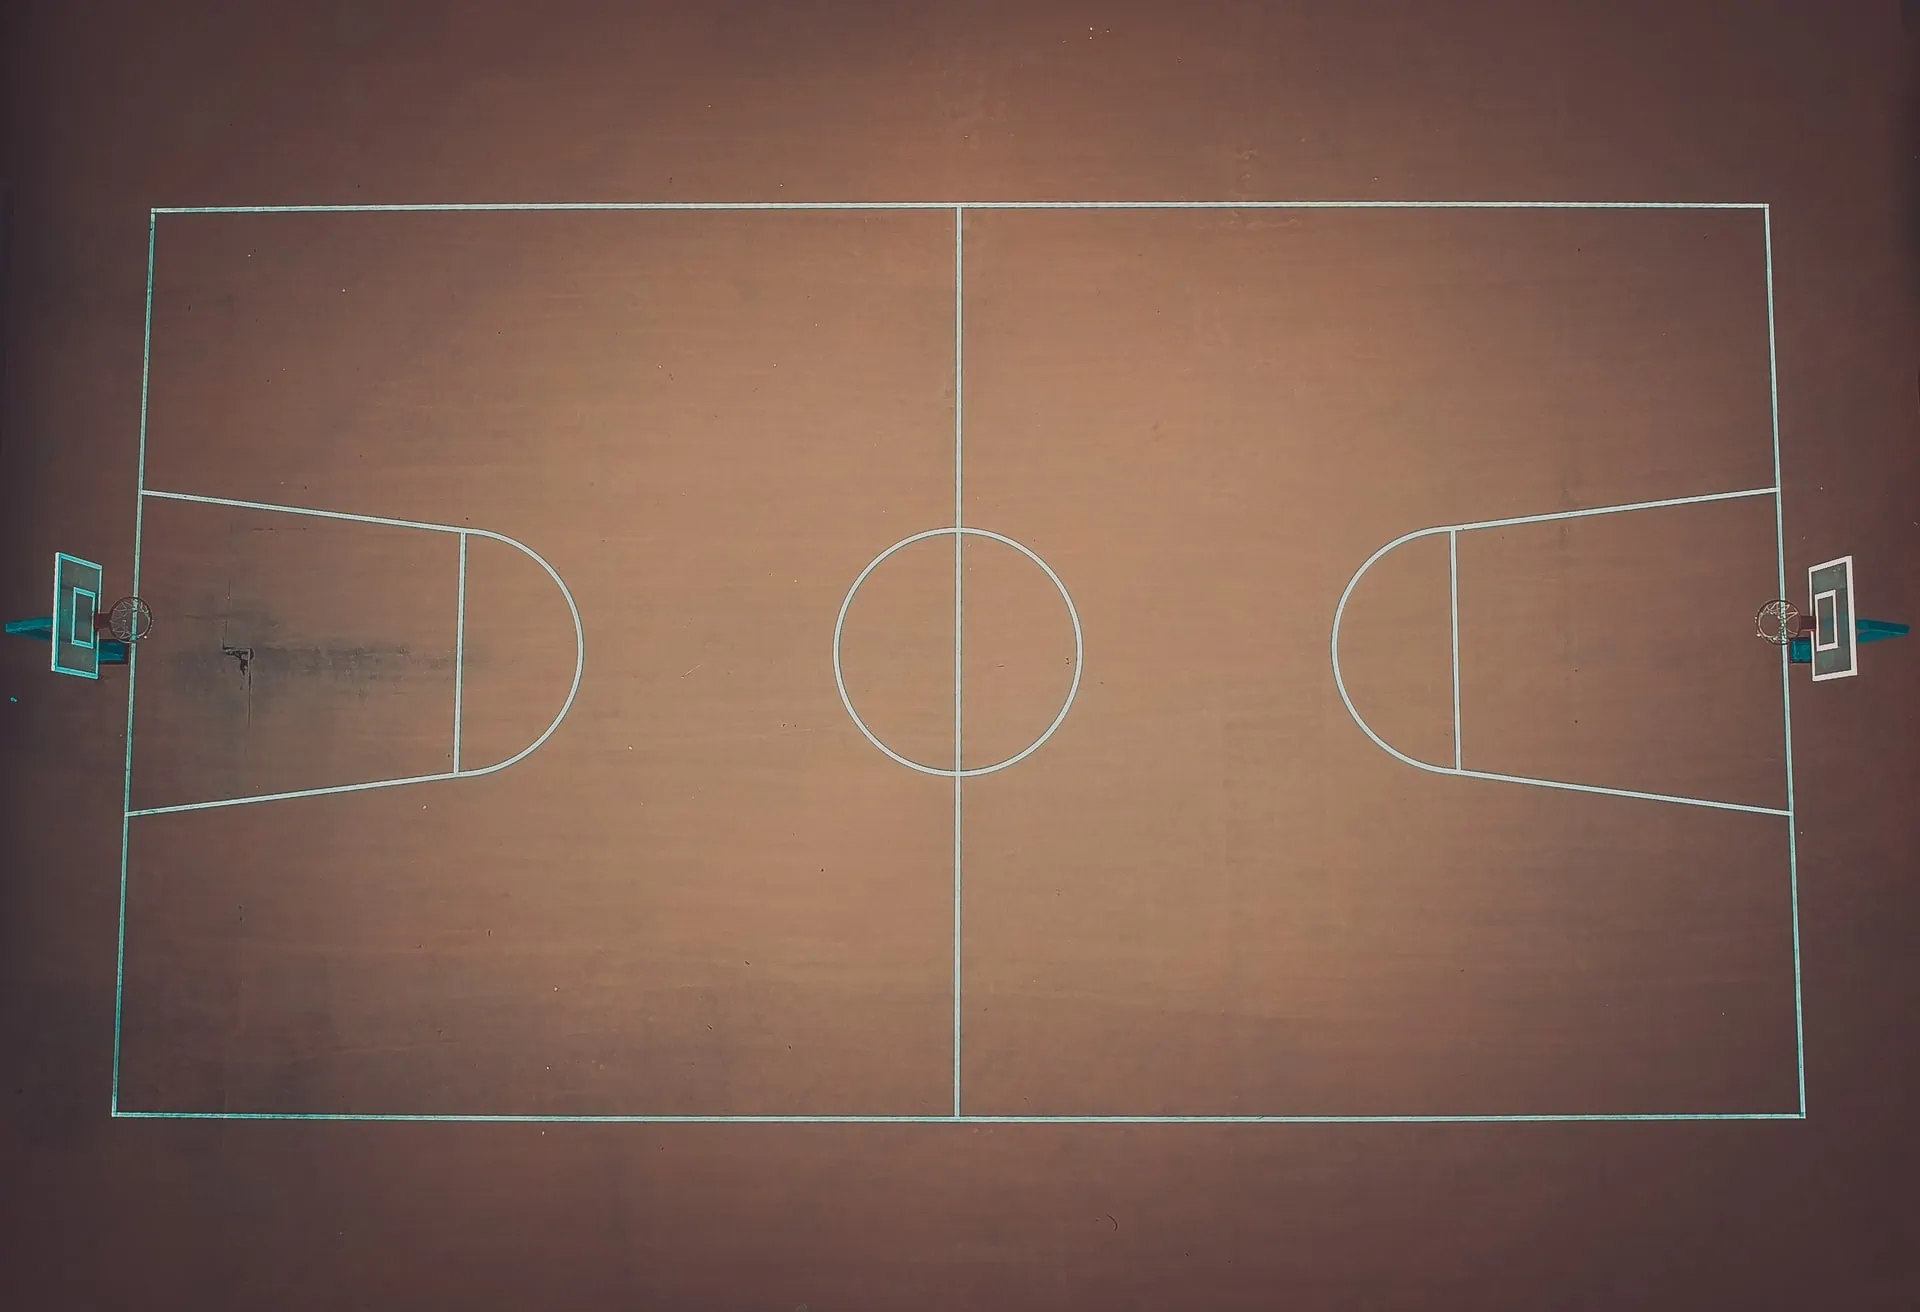 History of the Basketball Court